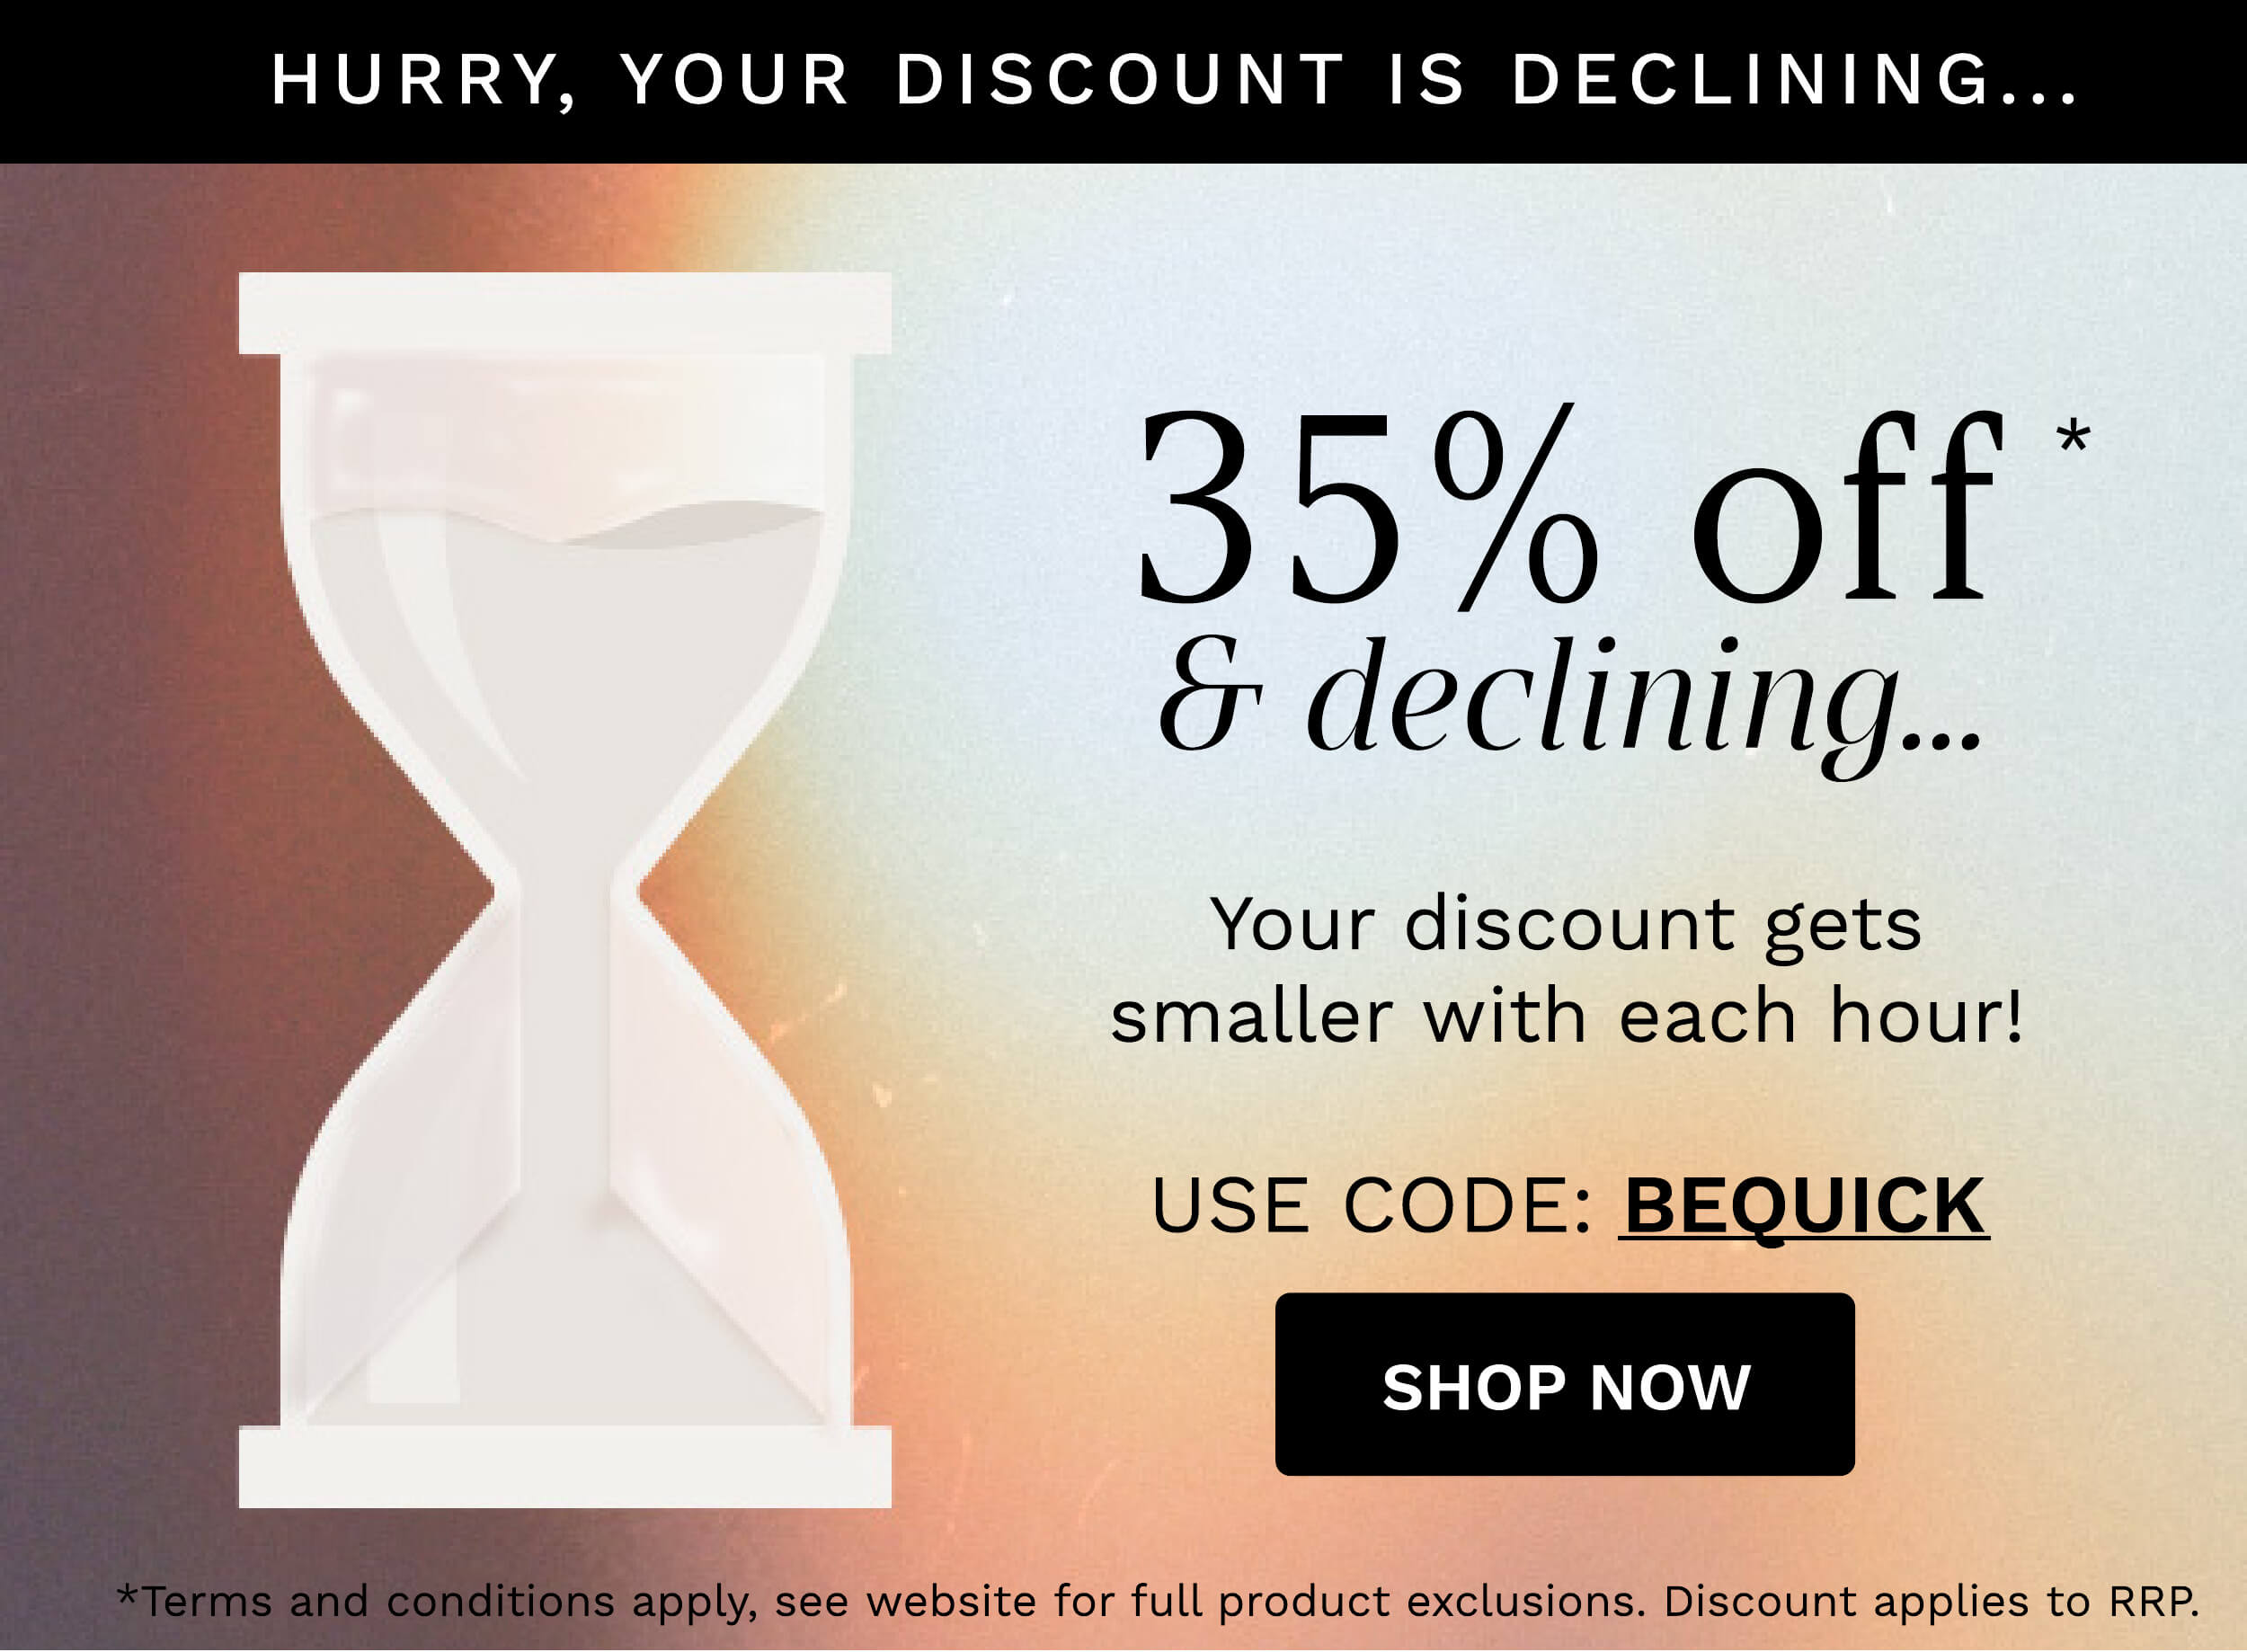 HURRY, YOUR DISCOUNT IS DECLINING... 35% off" declining... Your discount gets smaller with each hour! USE CODE: BEQUICK SHOP NOW s apply, see website for full product exclusions. Discount applies to RRP. 